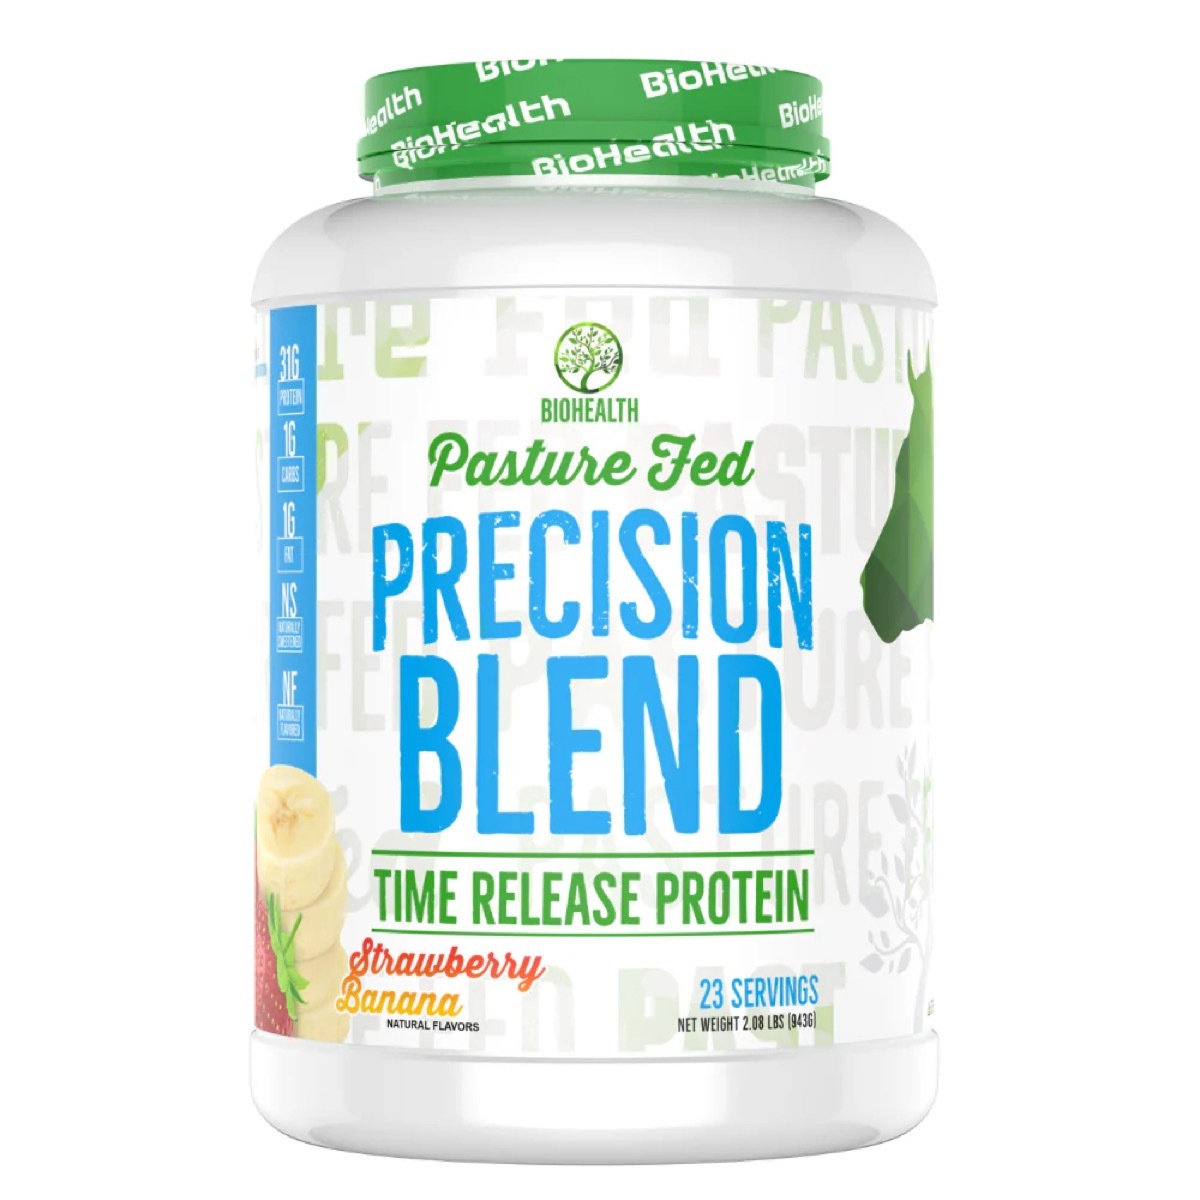 BioHealth Precision Blend Protein Supplement on white background